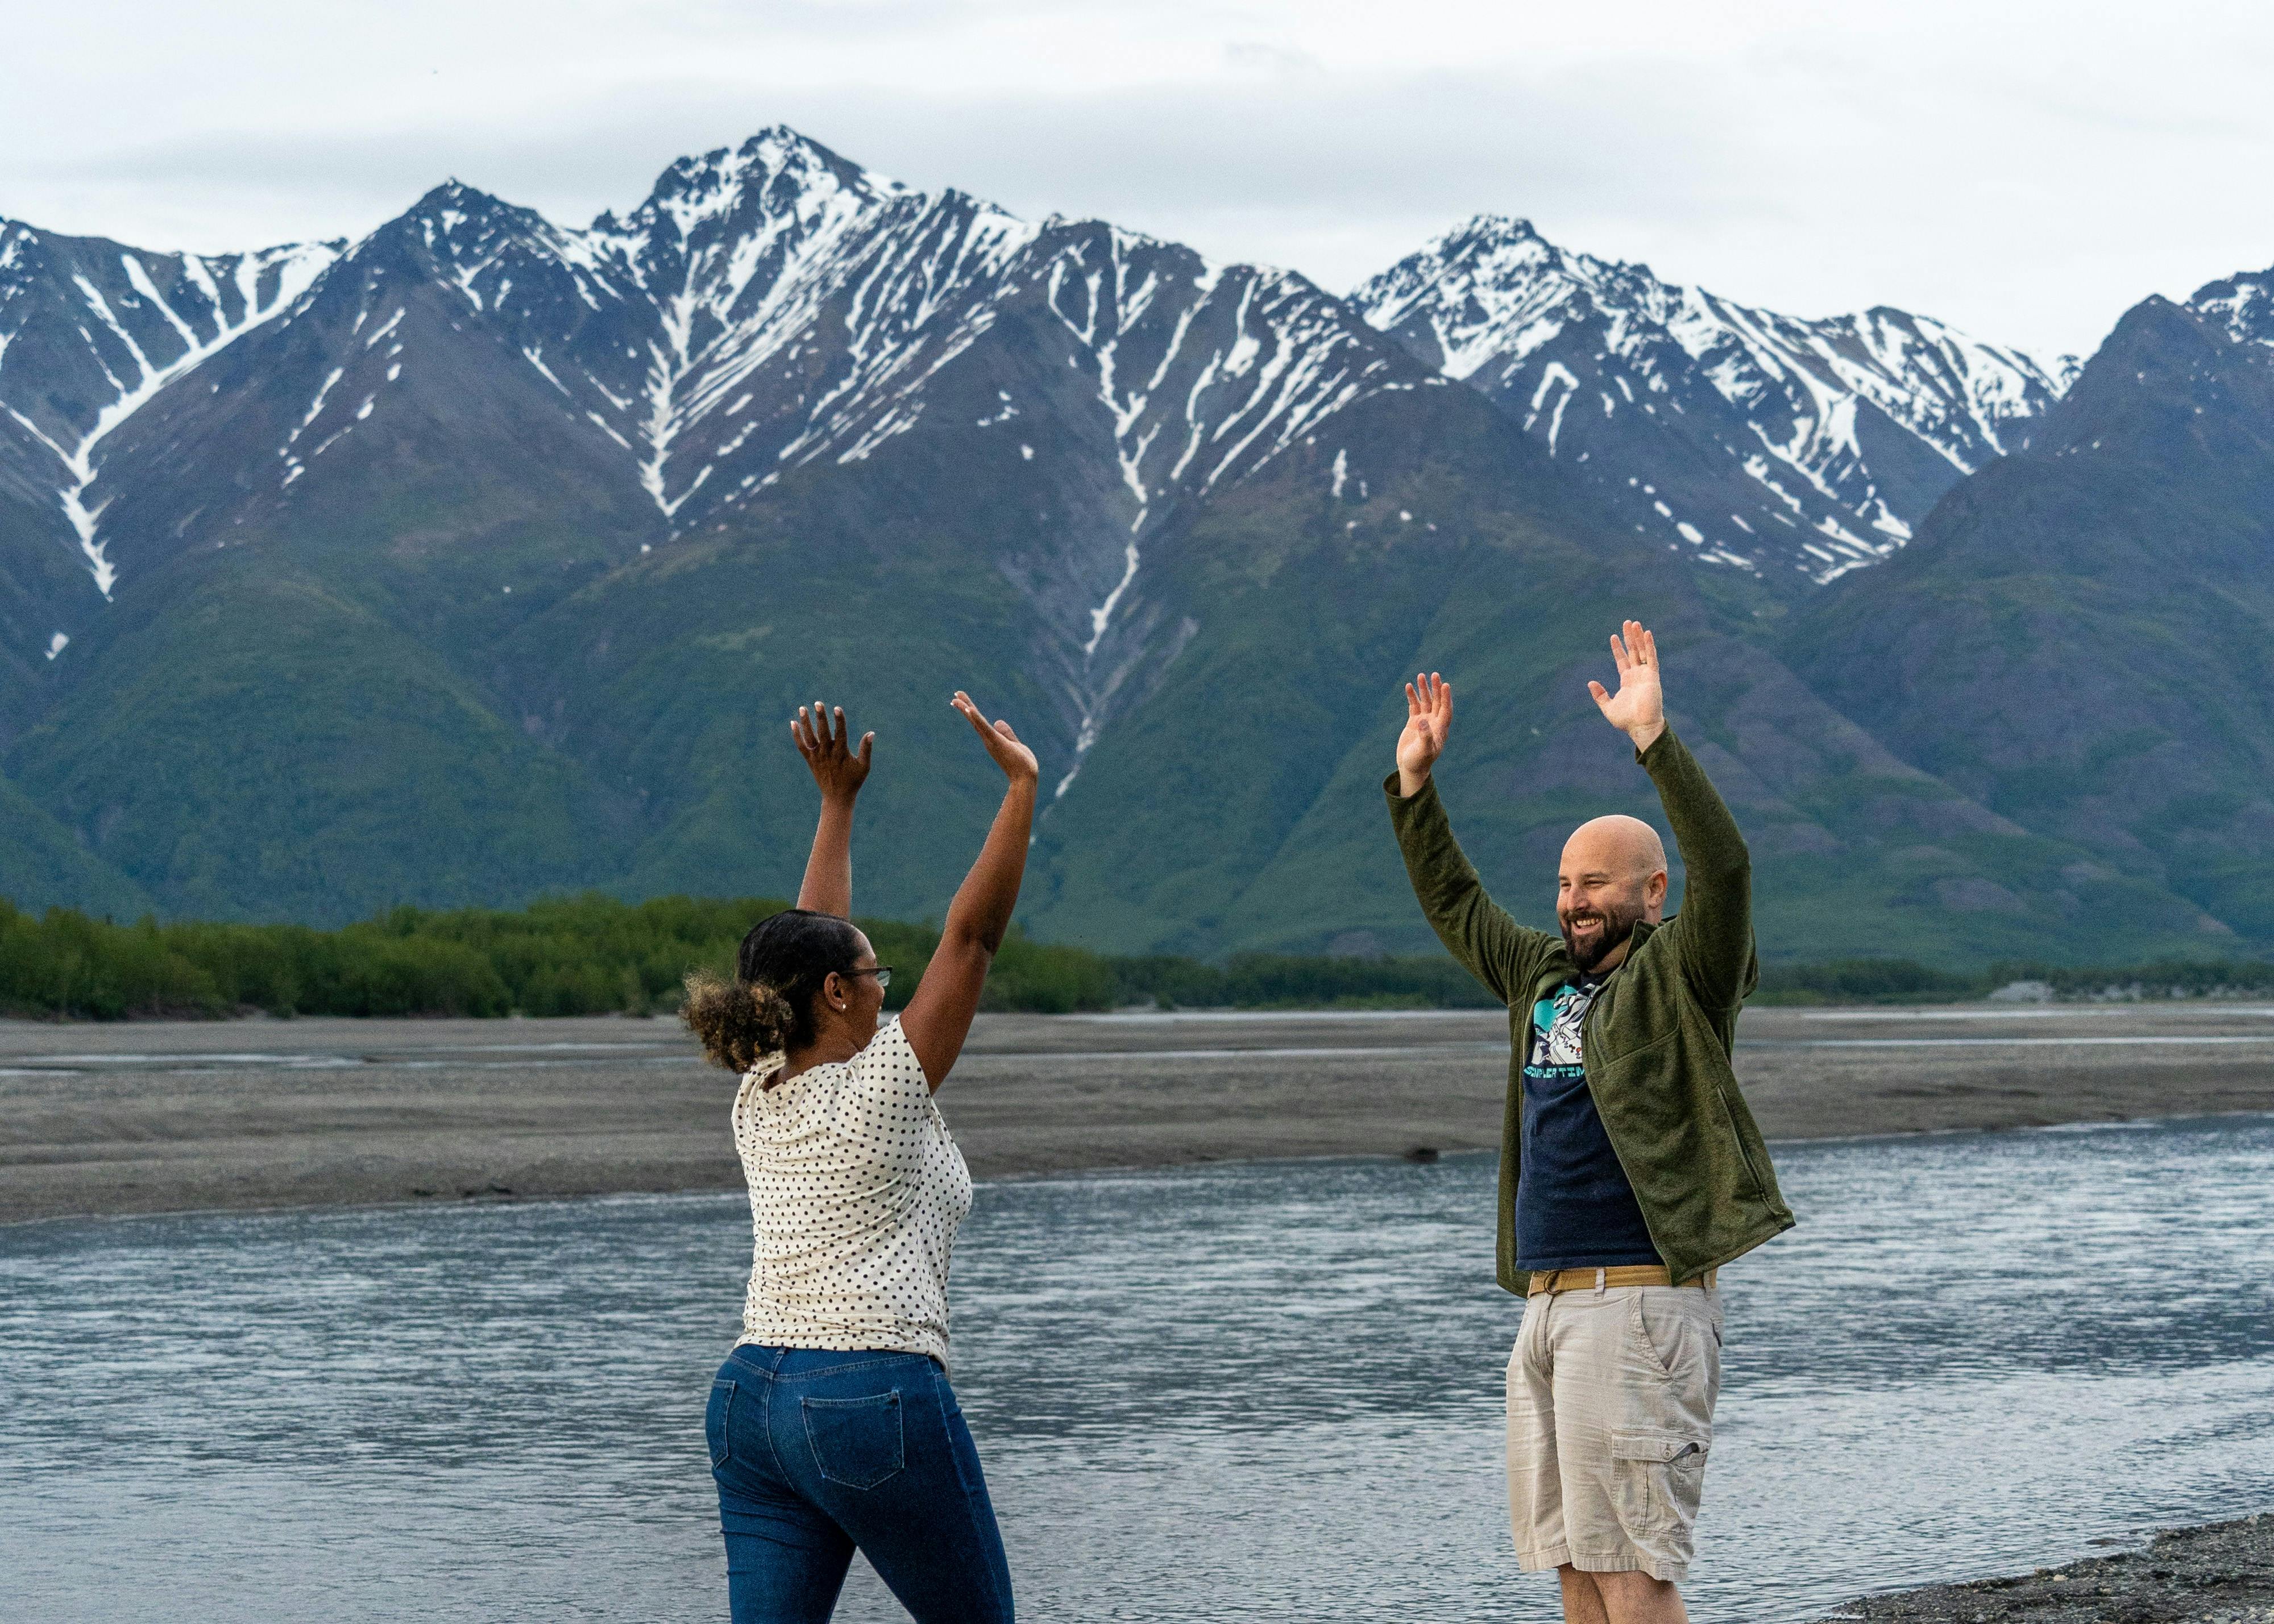 Gabe and Rocio Rivero smiling with their arms raised in front of mountains